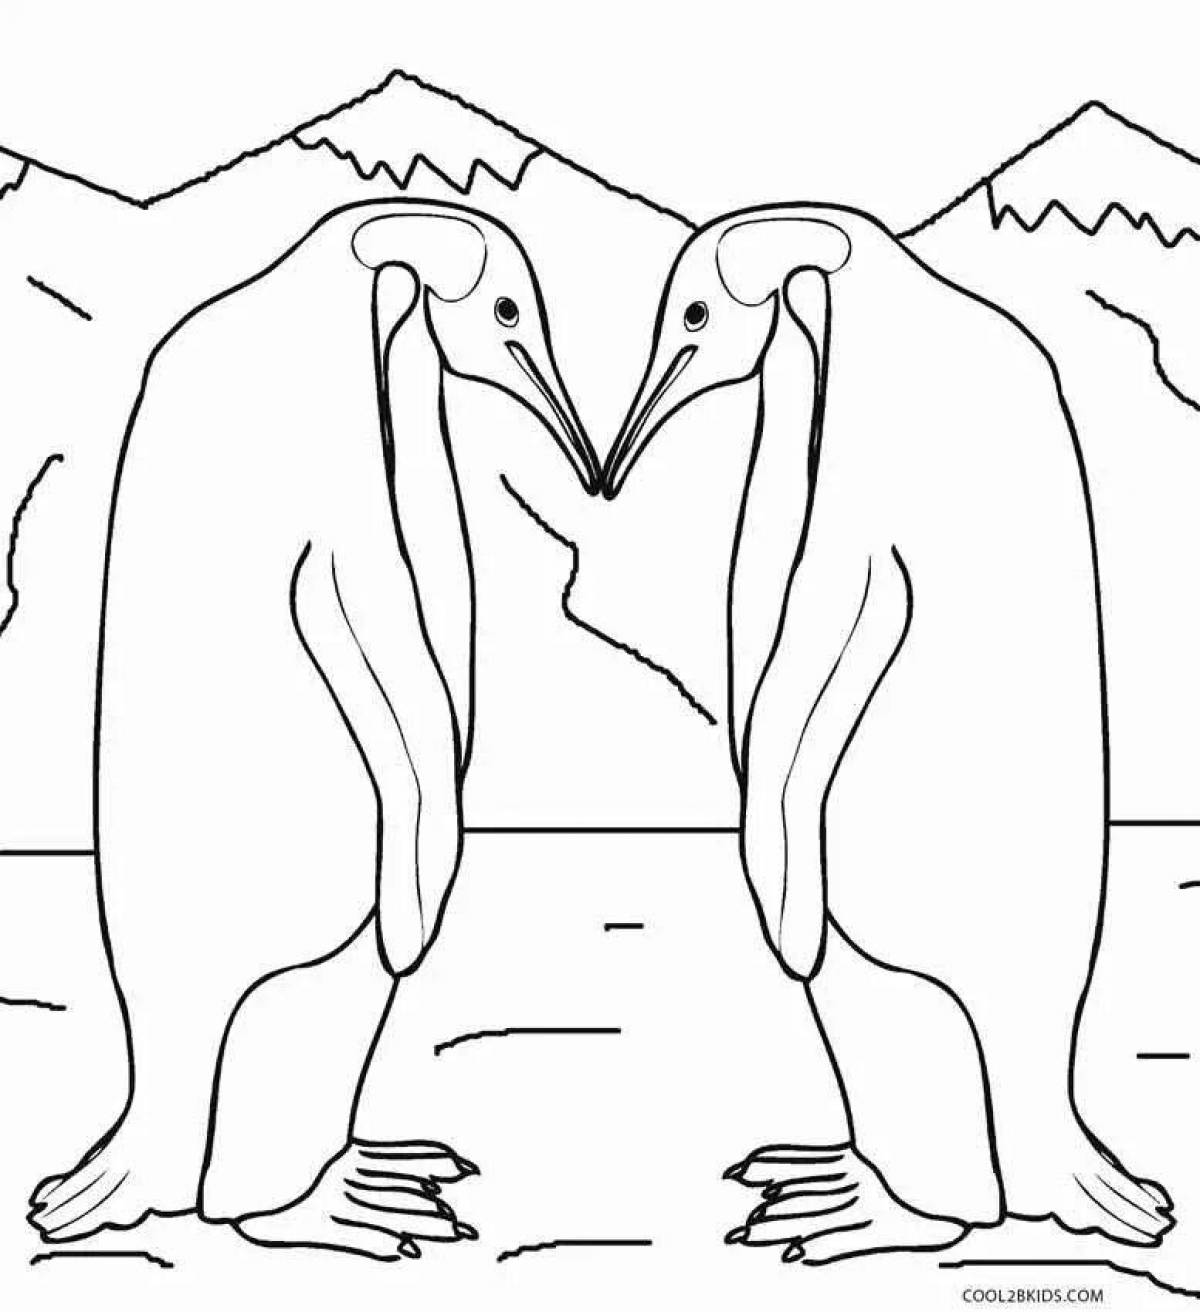 Colorful emperor penguin coloring page